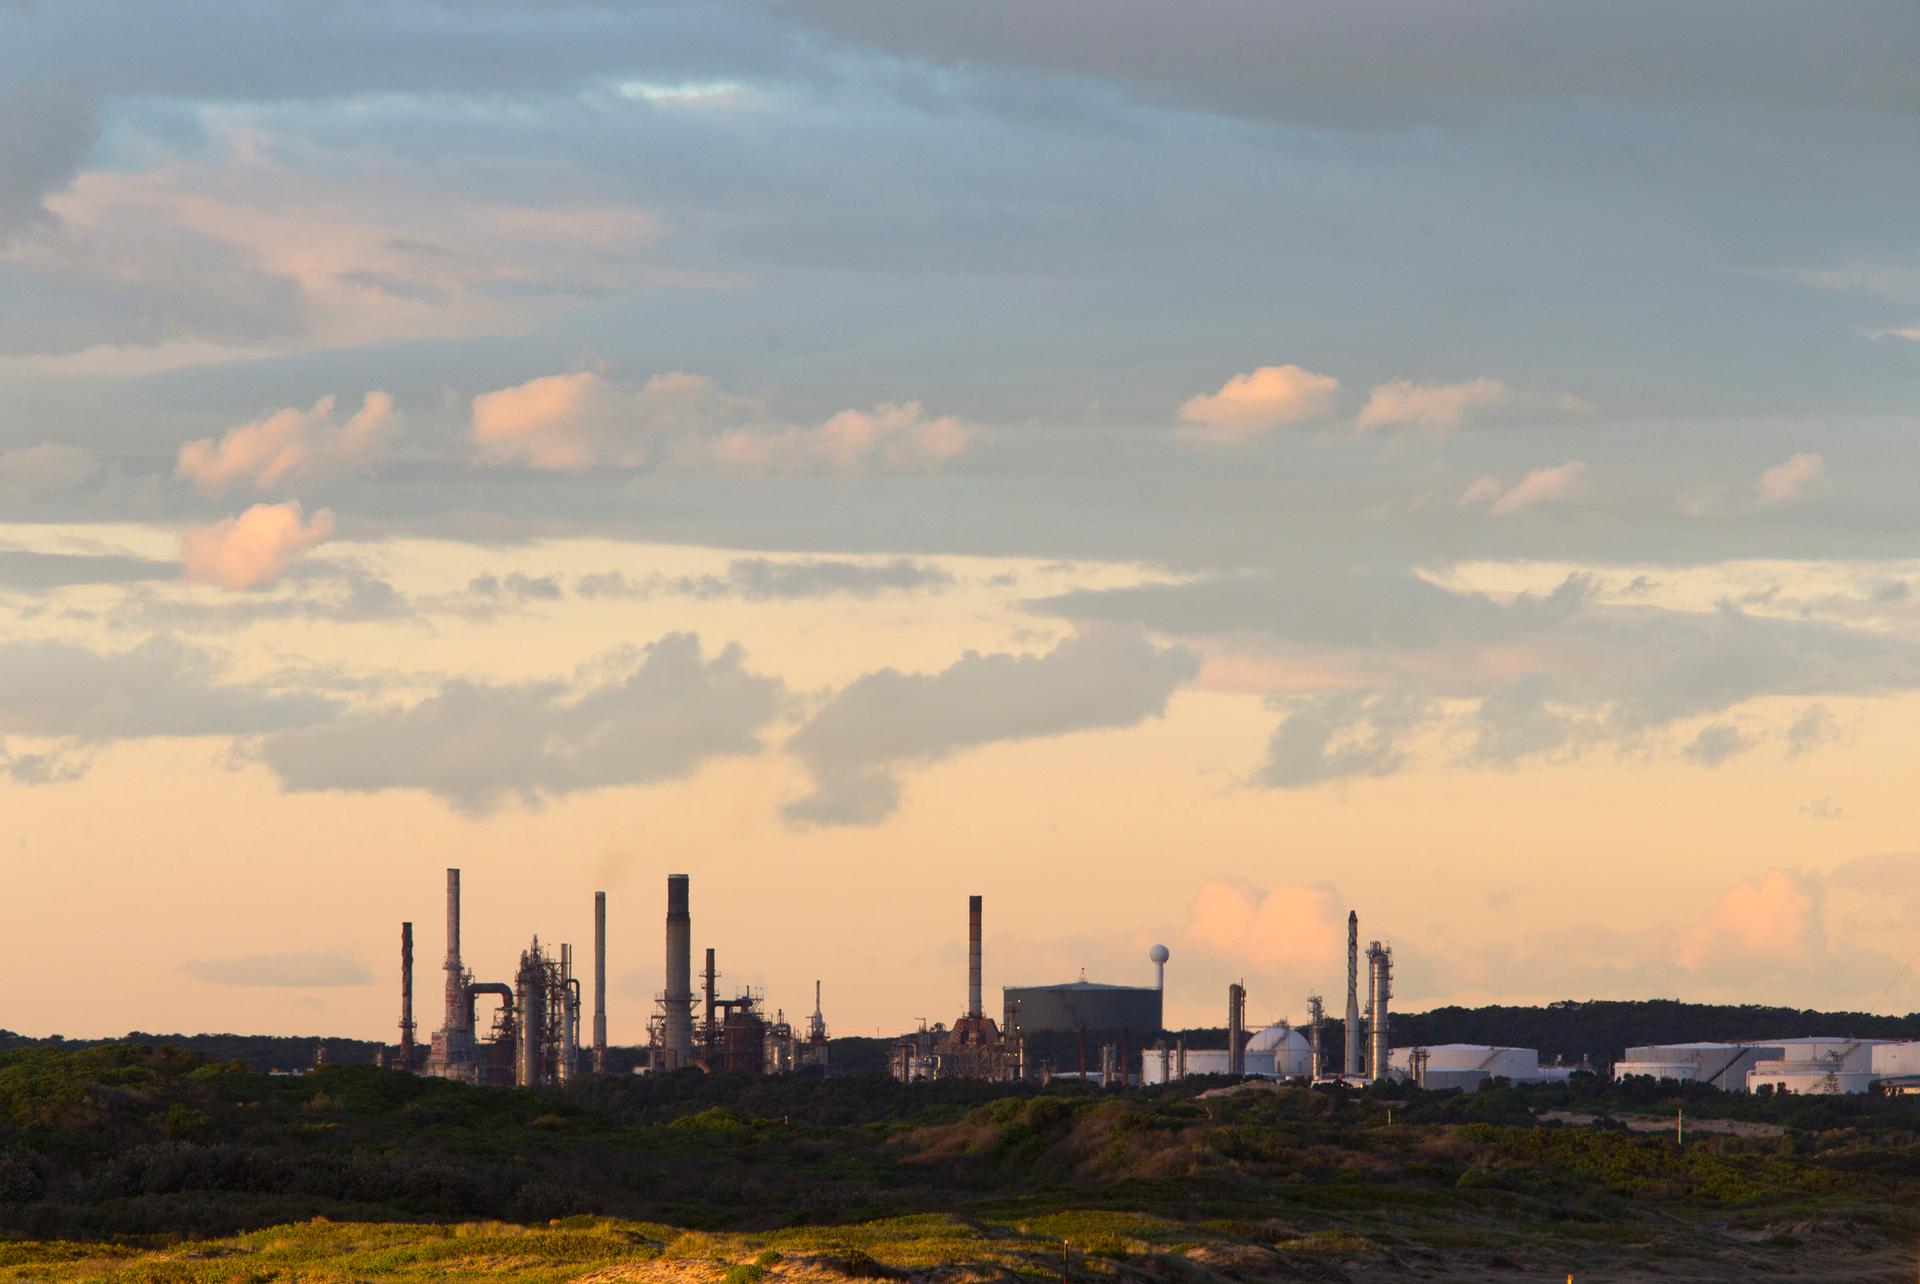 An oil refinery is pictured in the southern Sydney suburb of Kurnell. After the scrapping of Australia's carbon tax, companies will be allowed to voluntarily reduce emissions without requirements for reductions.